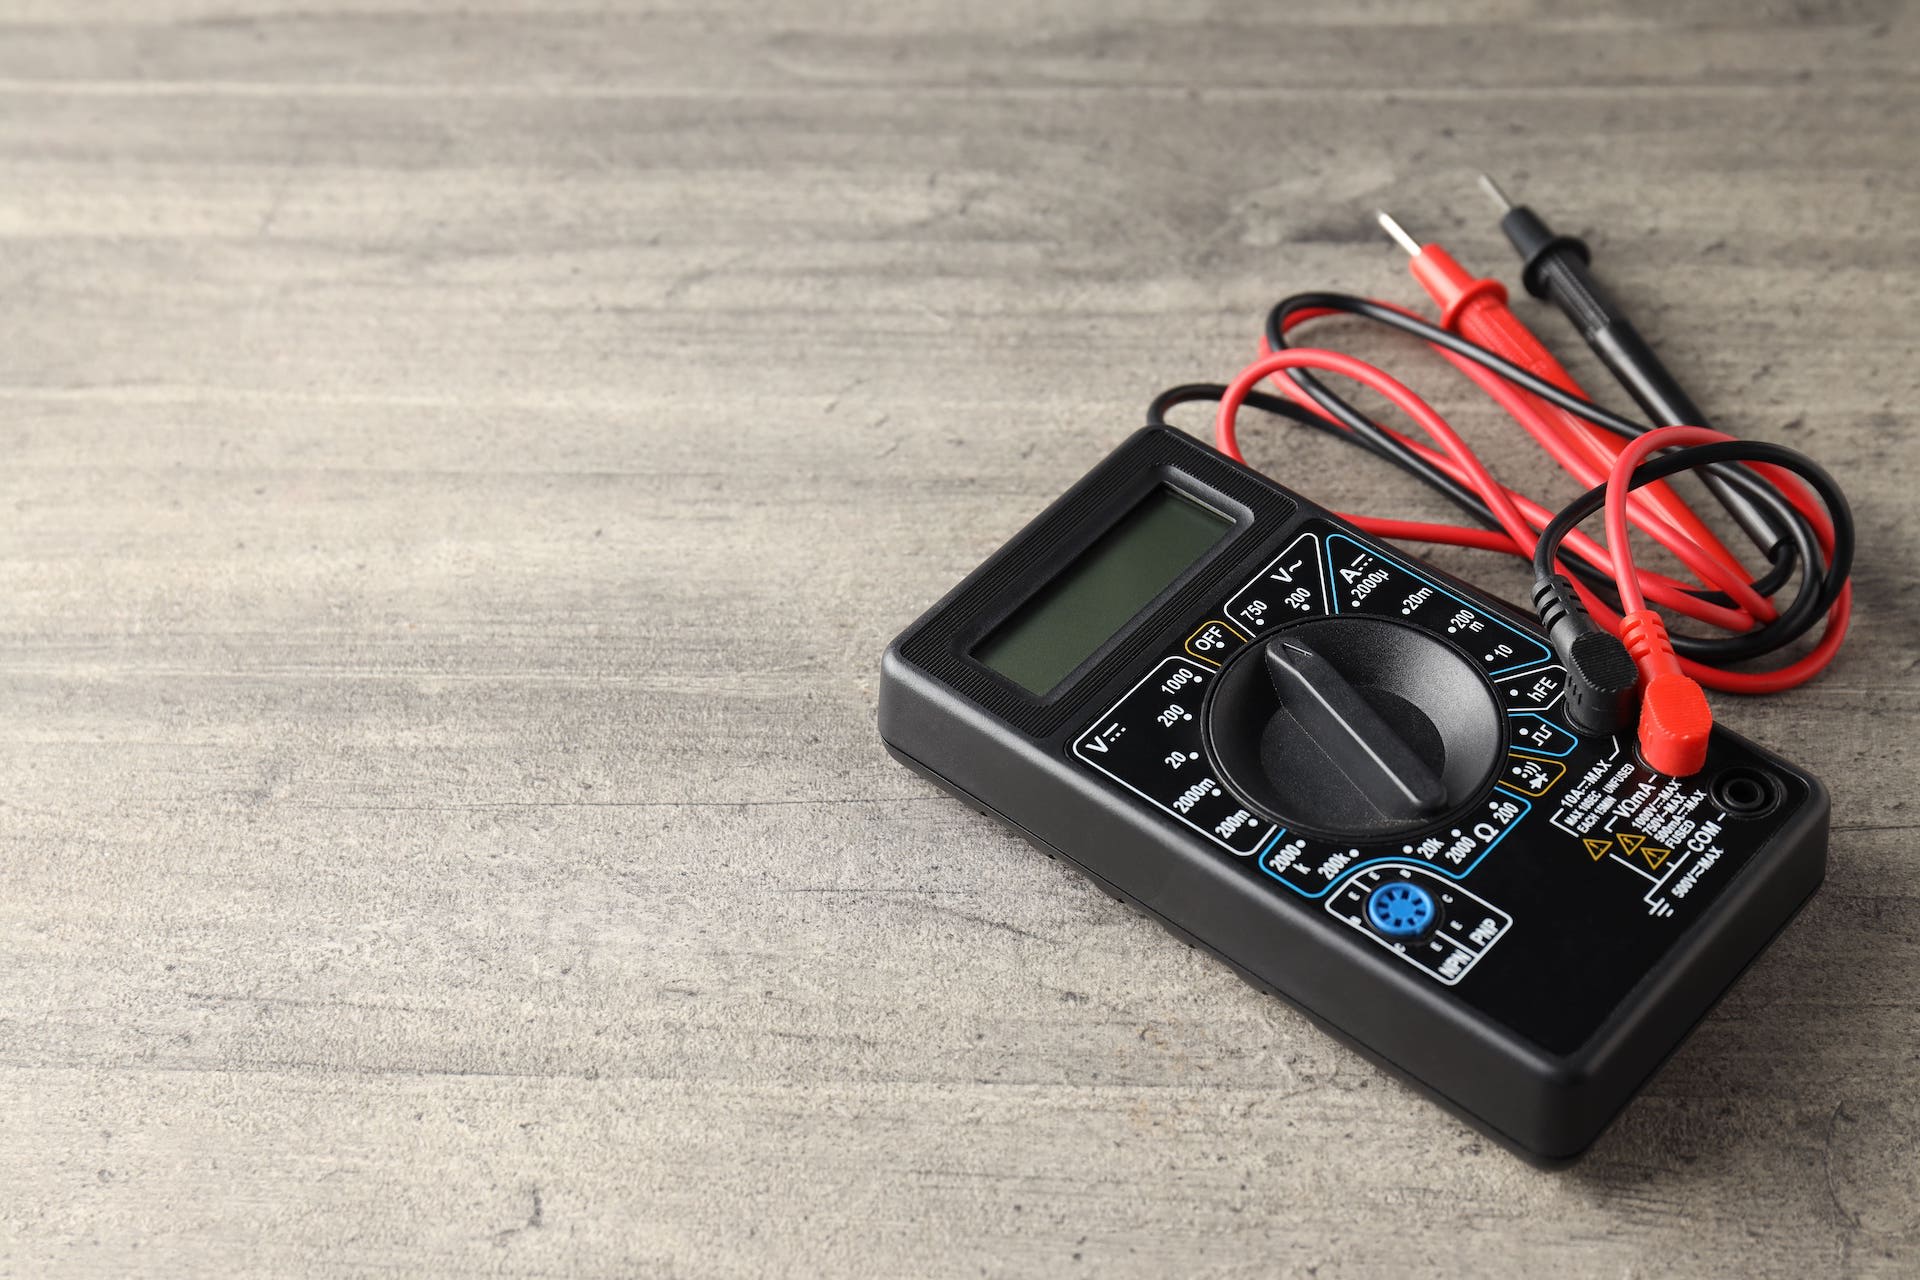 A Buyer’s Guide to Choosing the Right Digital Multimeter